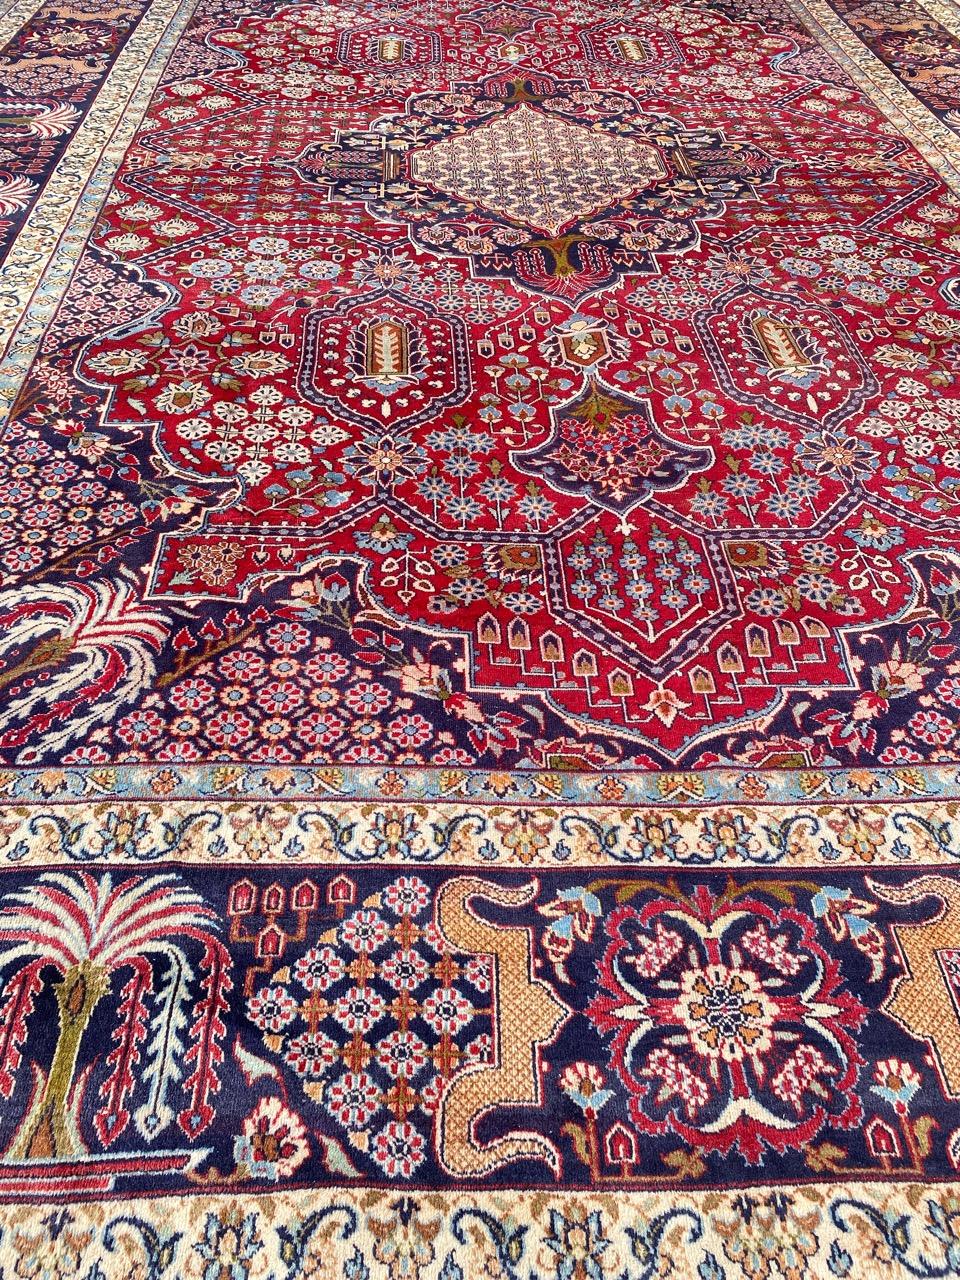 Very pretty vintage tabriz rug with beautiful decorative design and nice colors, entirely hand knotted with wool velvet on cotton foundation.

✨✨✨
